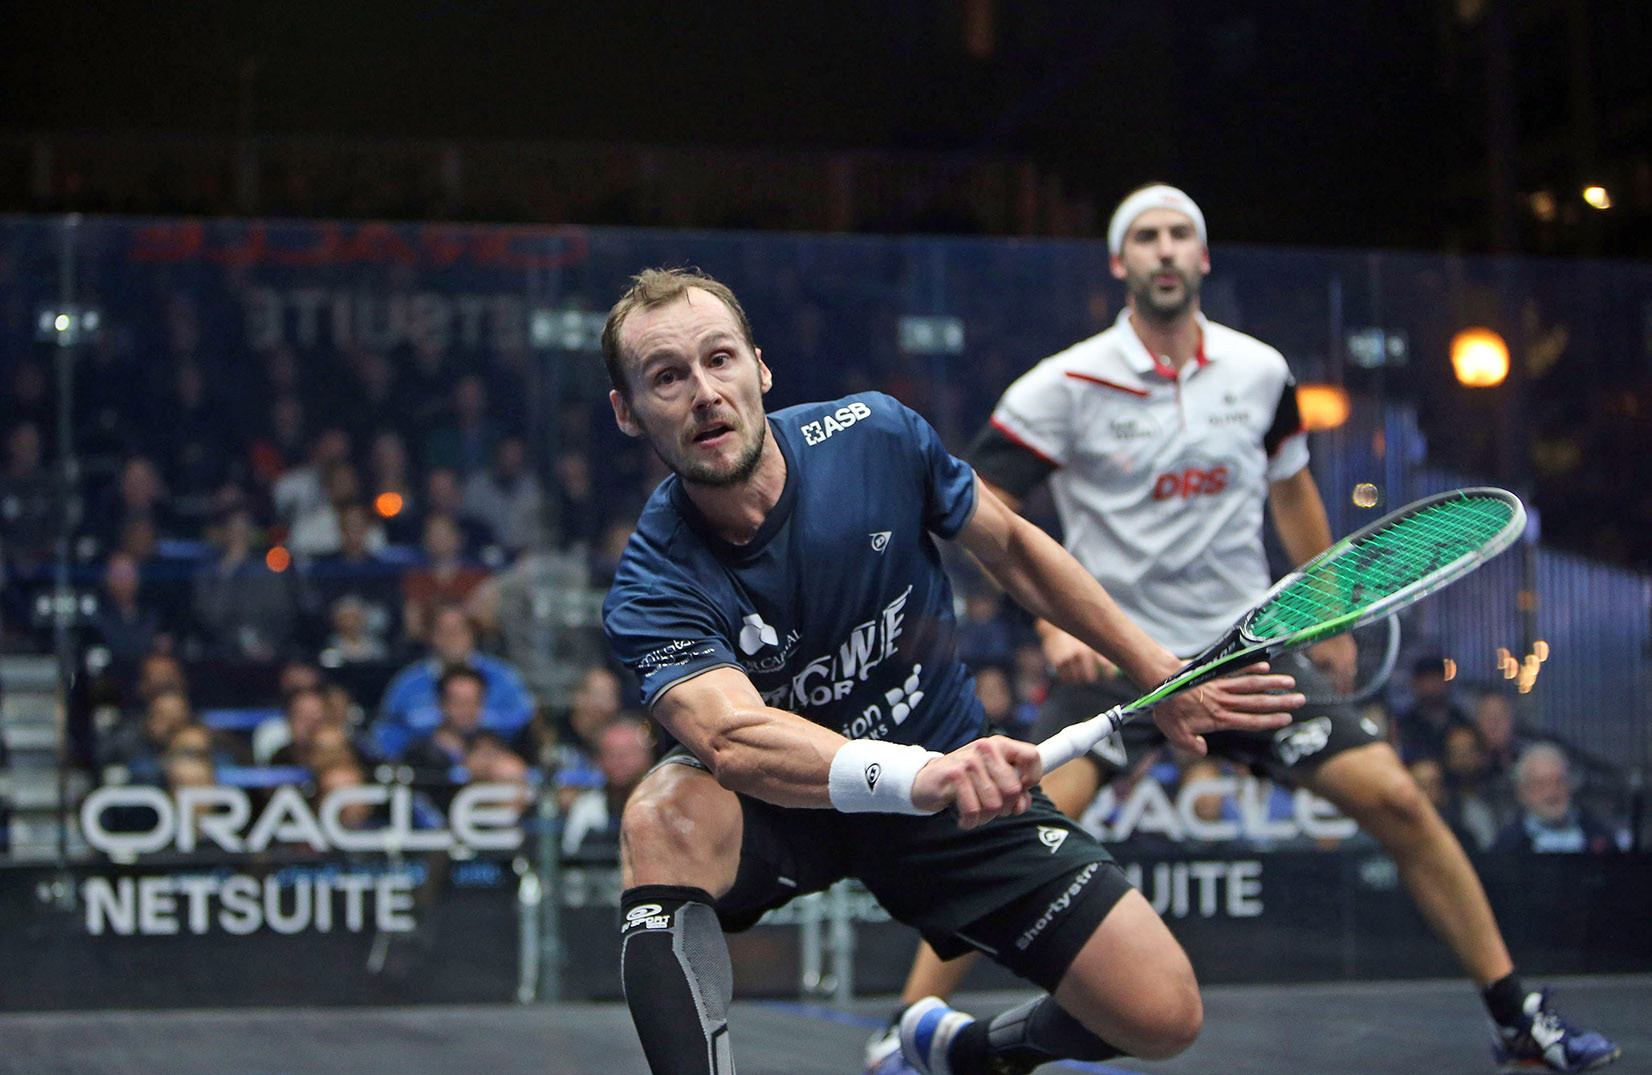 Gregory Gaultier booked his place in the men's semi finals ©Oracle Netsuite Open